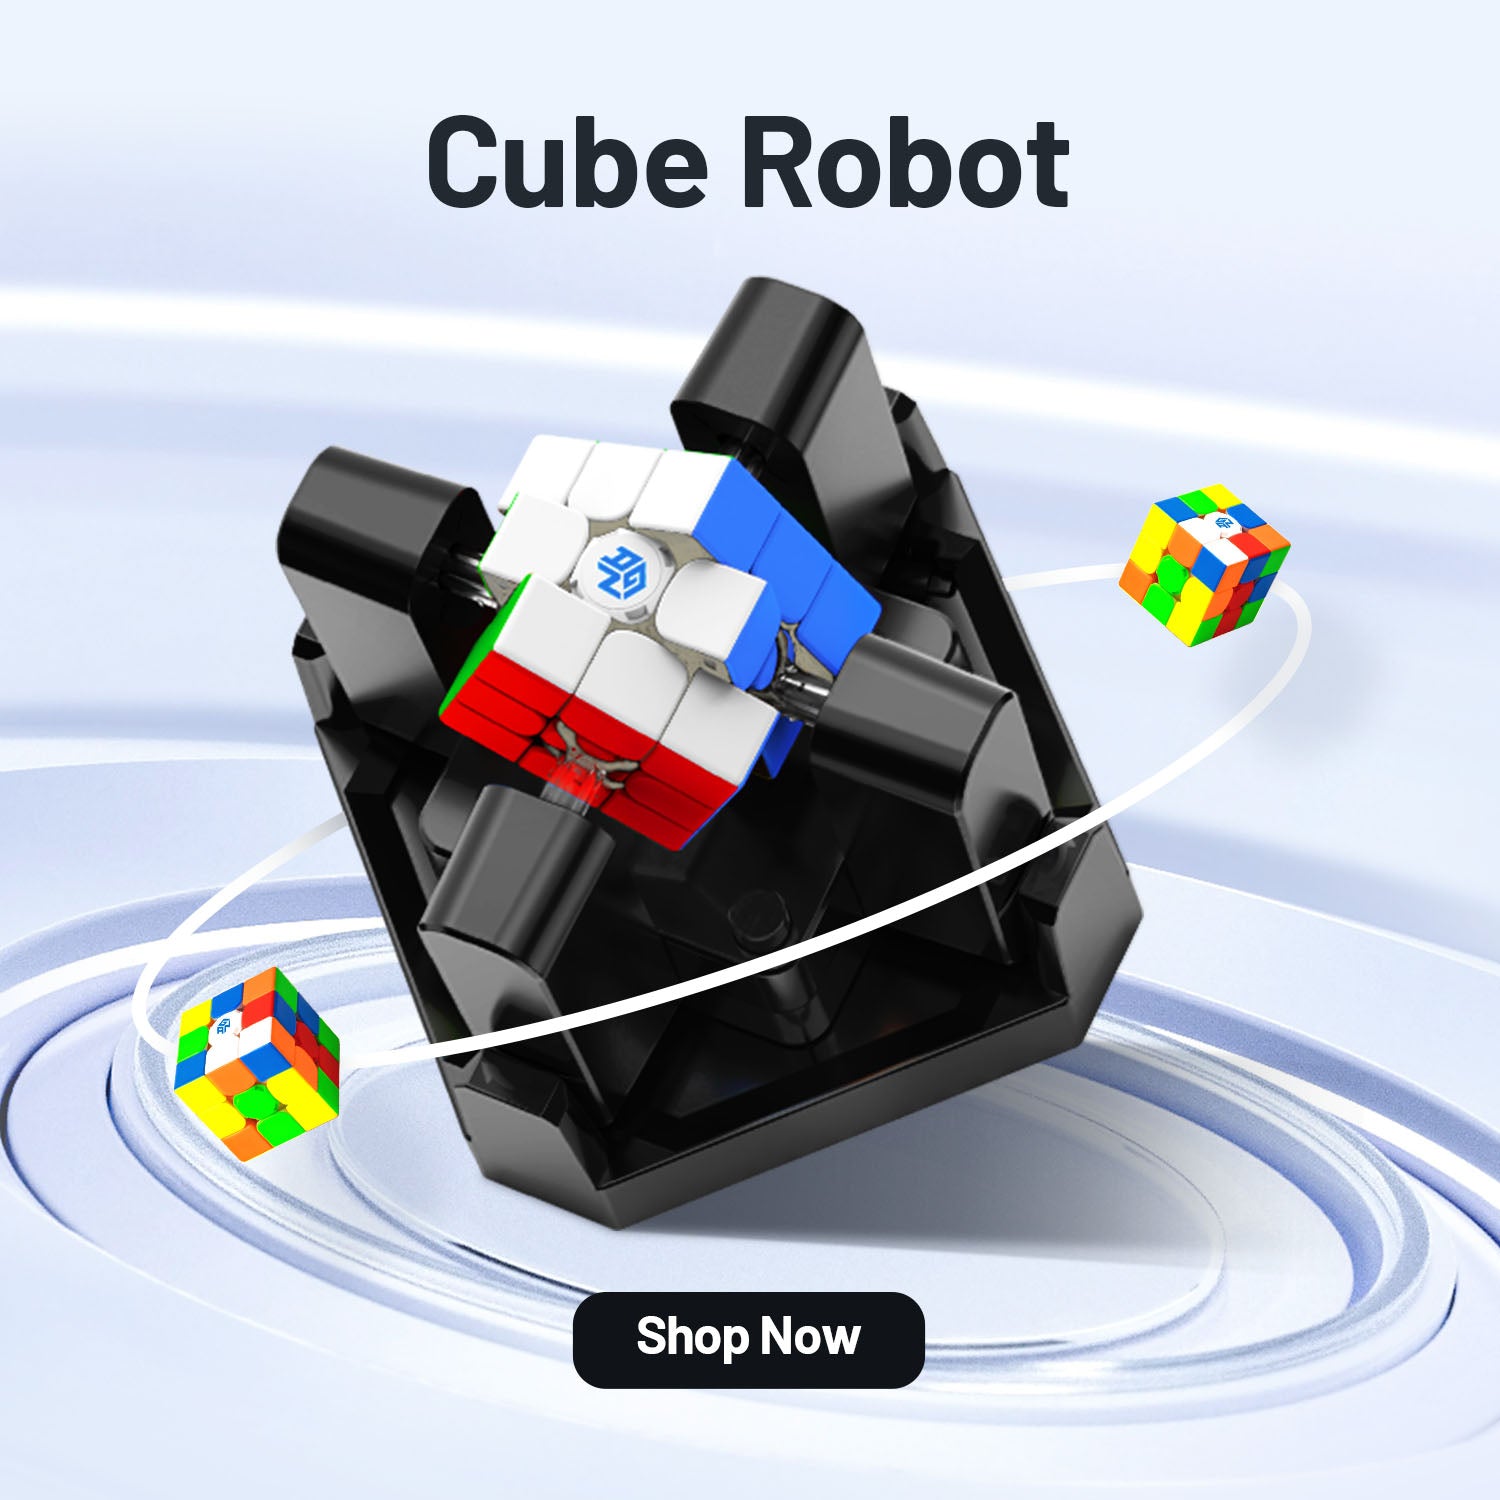 Official GAN Smart Cube Shop  Play with the World Champions